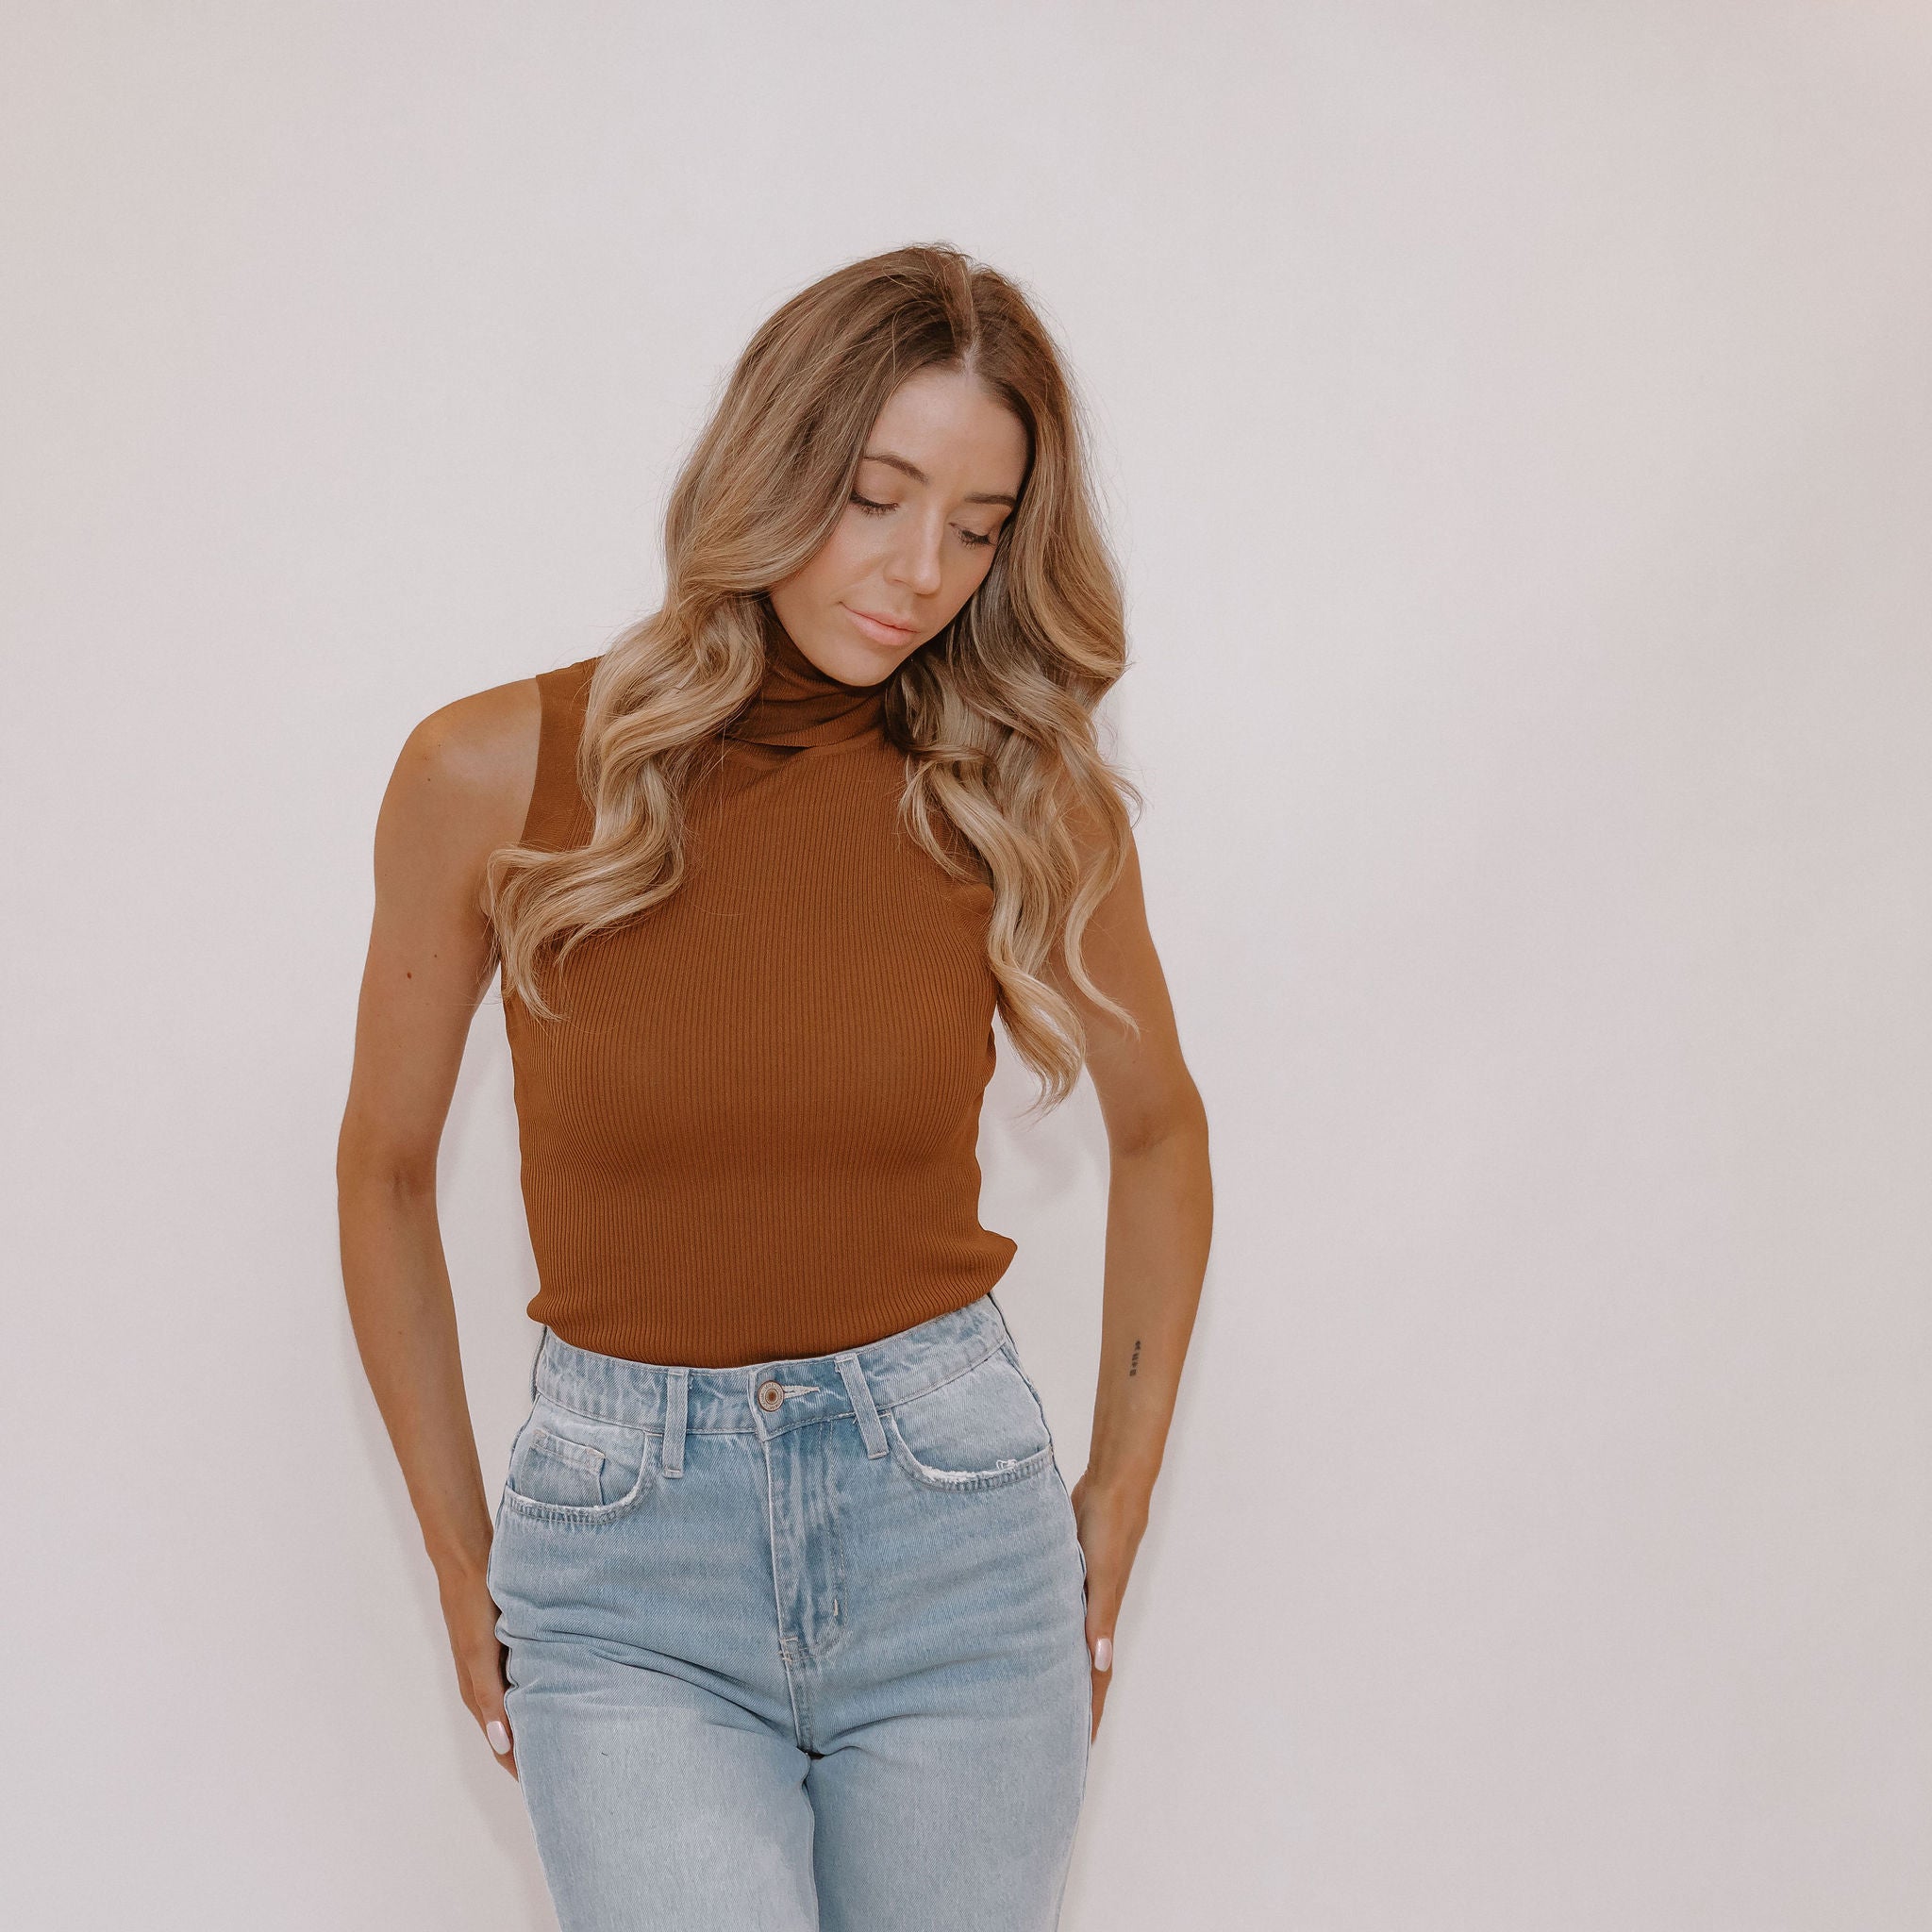 Vail Brown Turtle Neck Sleeveless Top